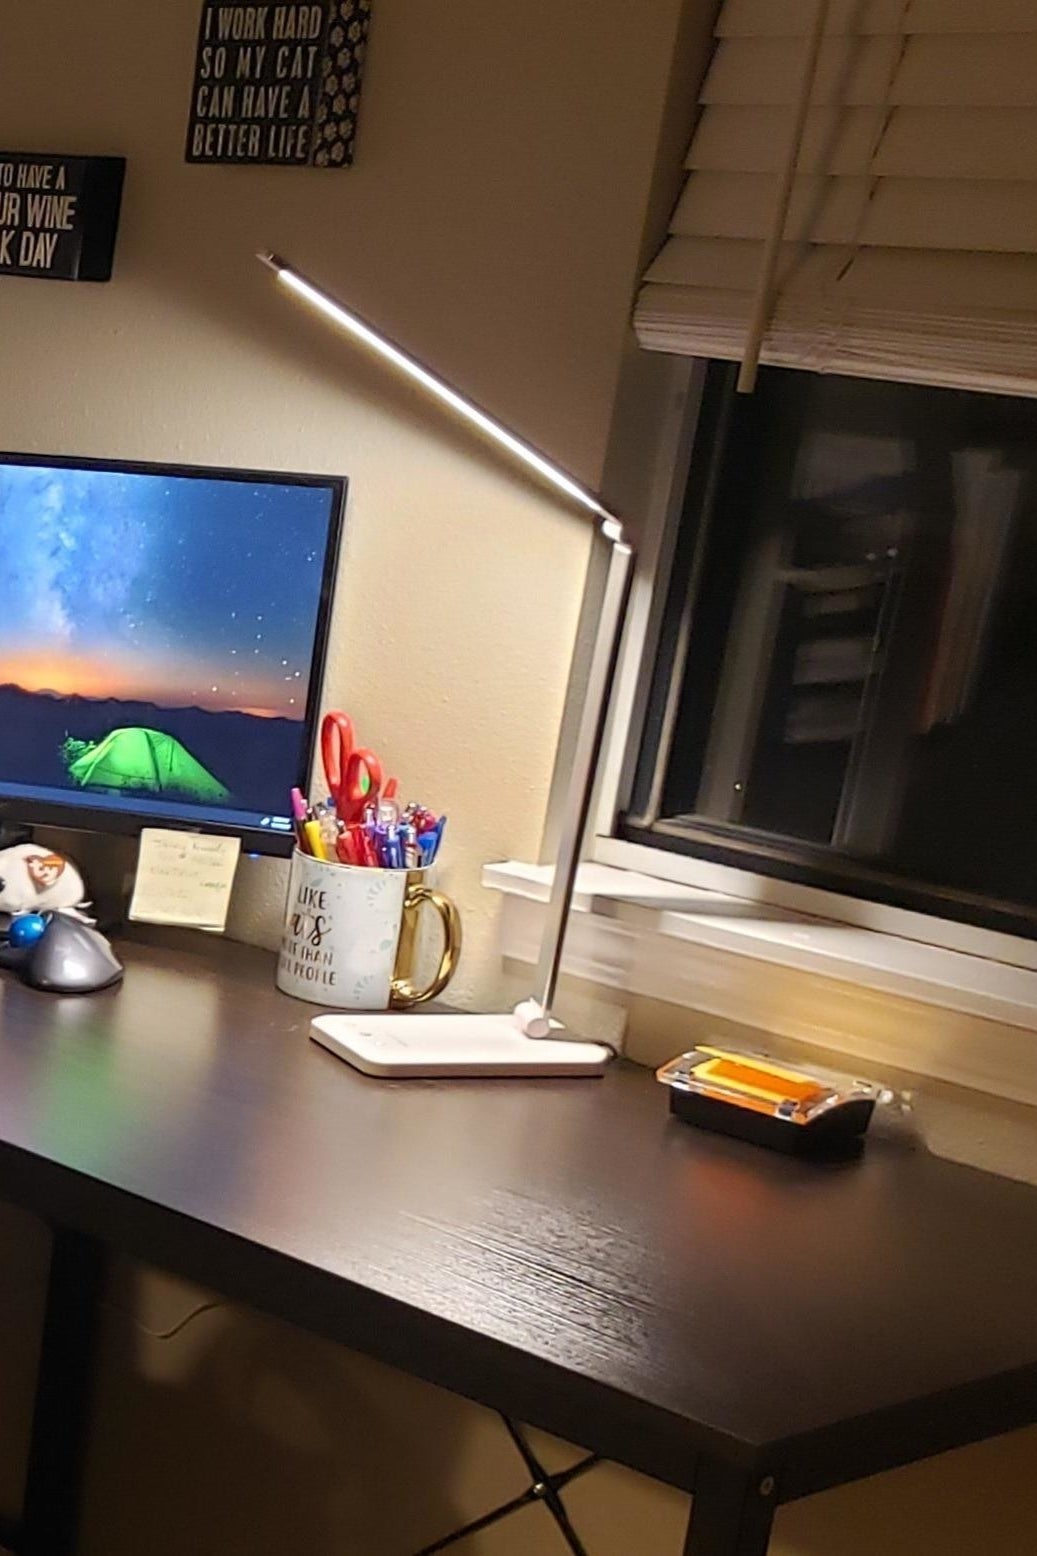 29 Useful Products That'll Make Your Desk A Better Place